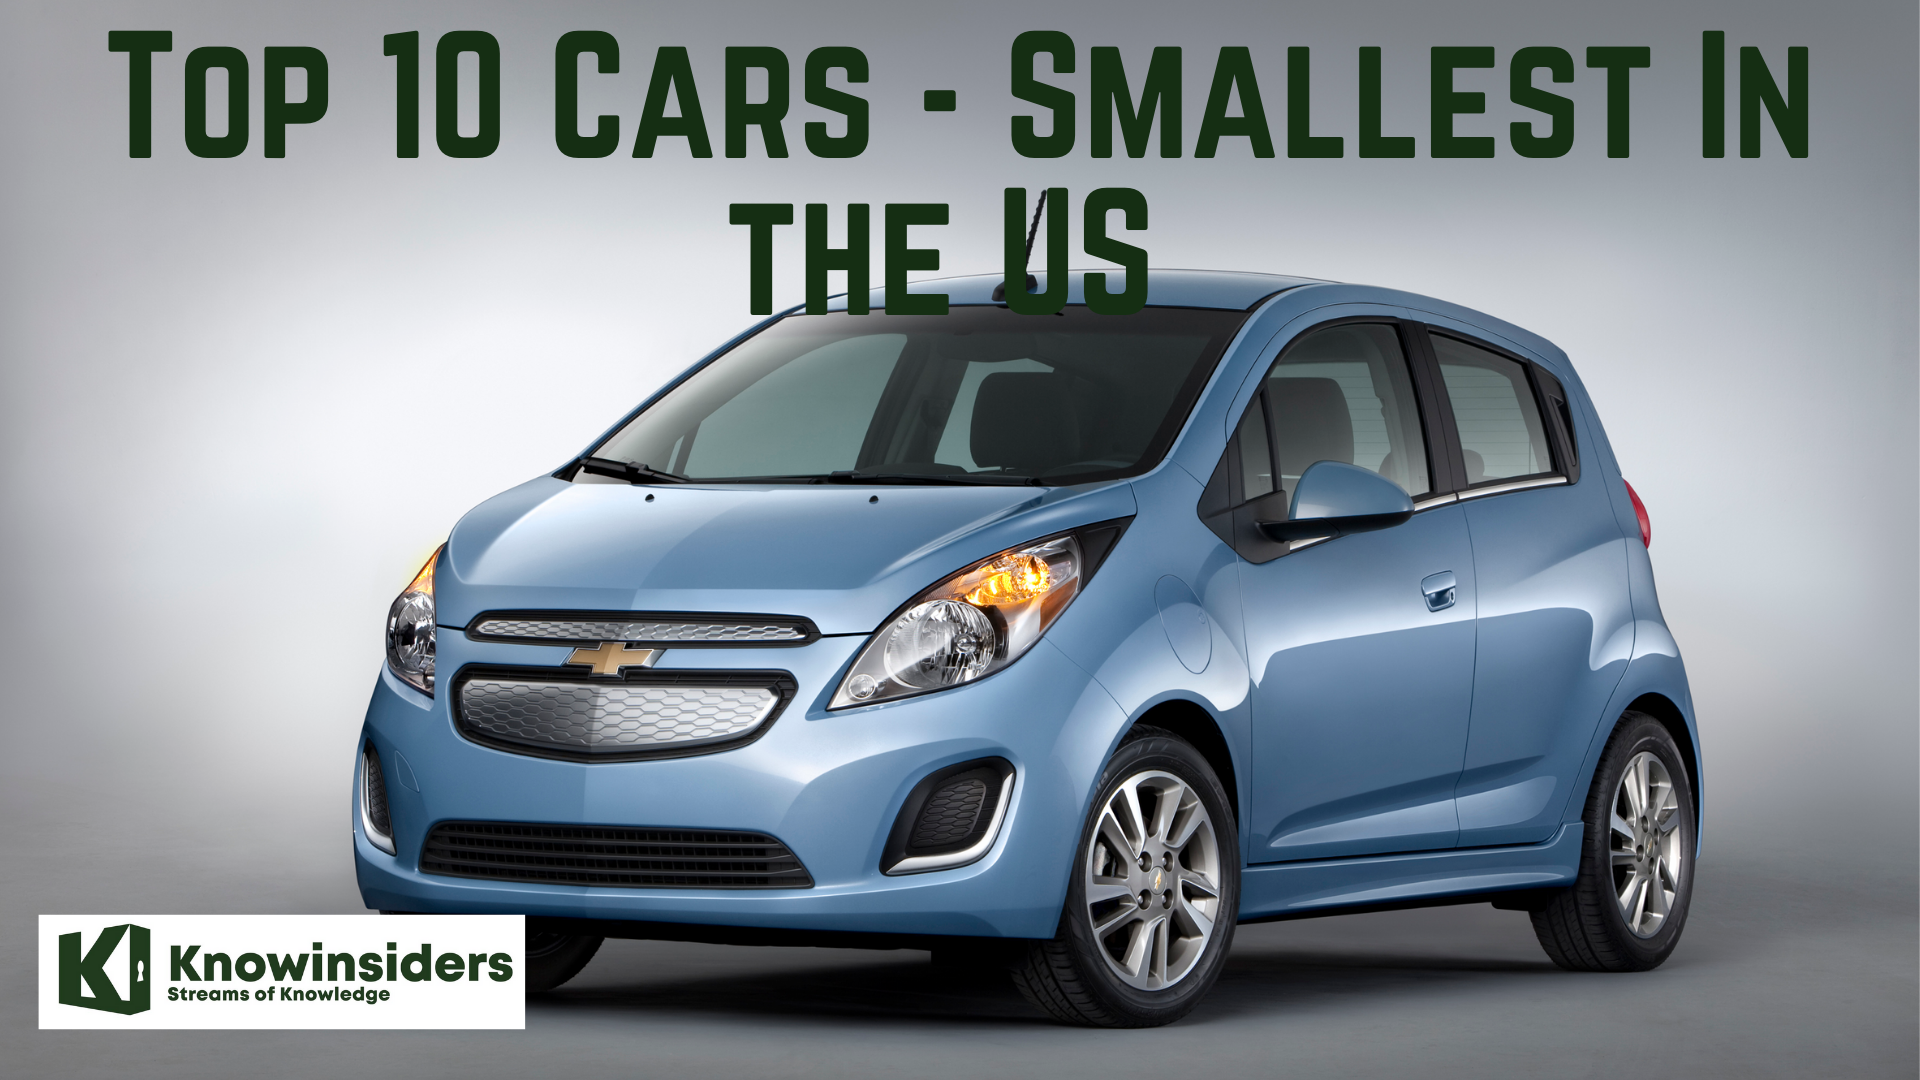 Top 10 Cars – Smallest in The U.S